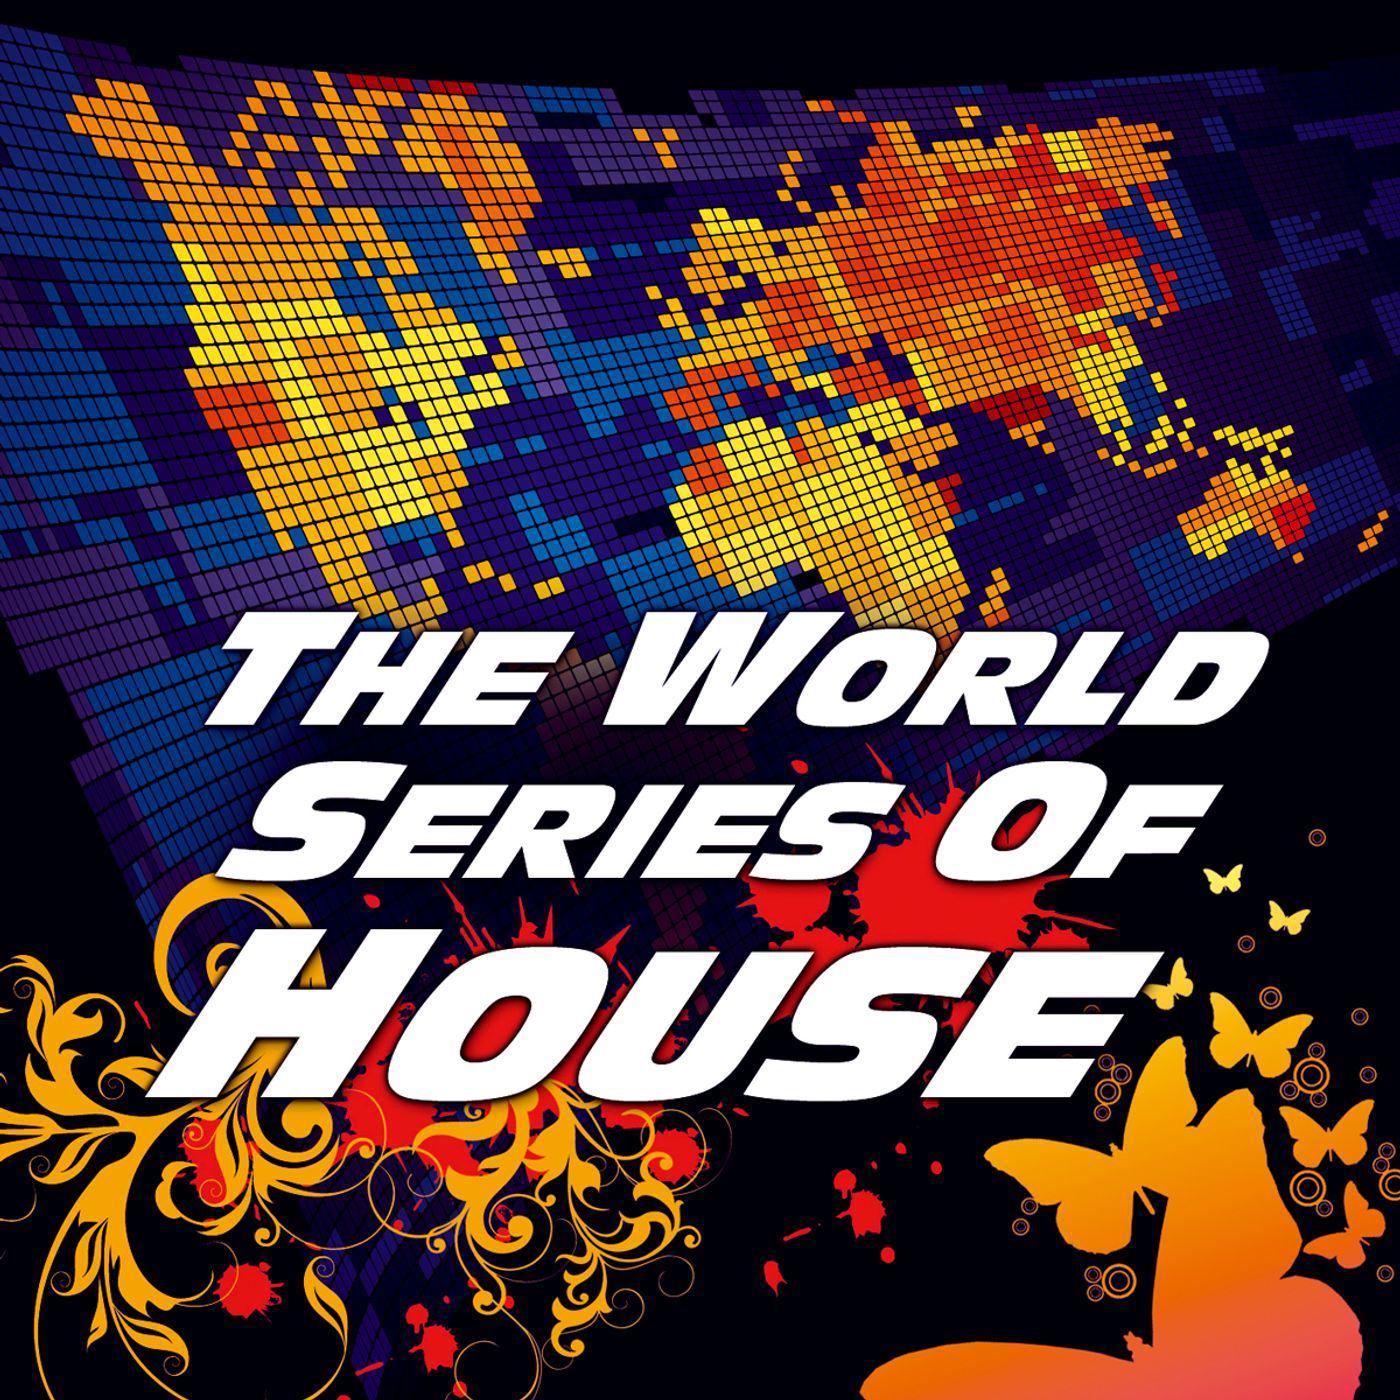 The World Series Of House